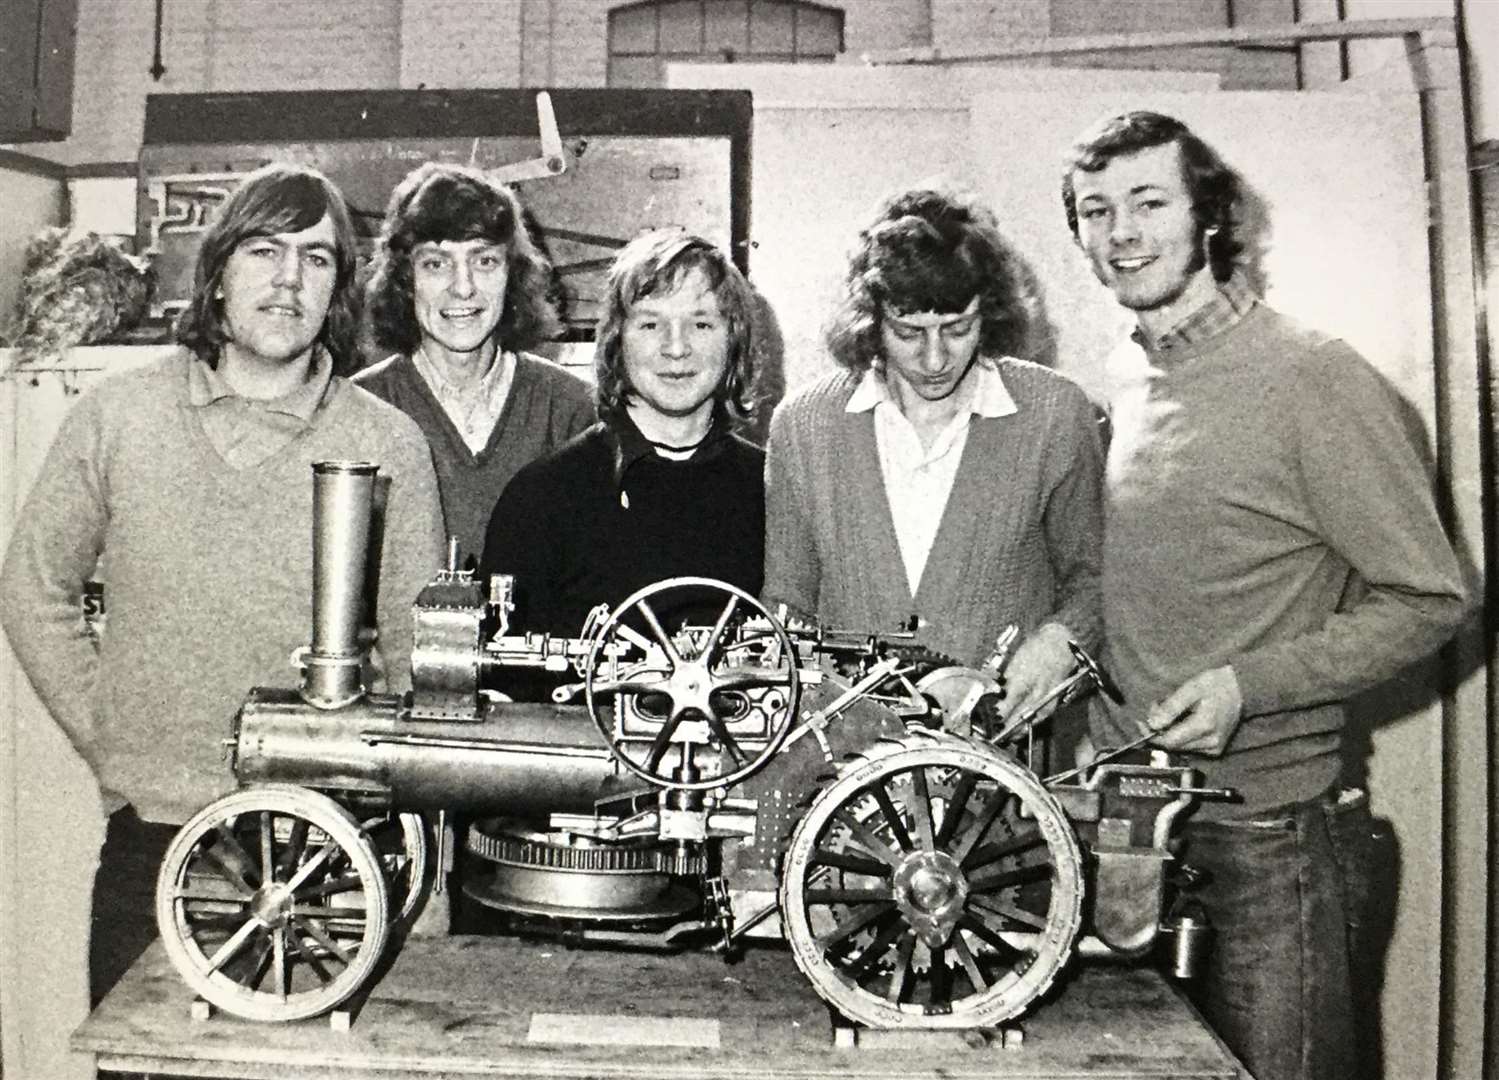 The Newtown railway works apprentices pictured in 1969; from left to right: Colin Rich, Tony Jenkins, Terry Warson, David Jenkins and Steve Goldup